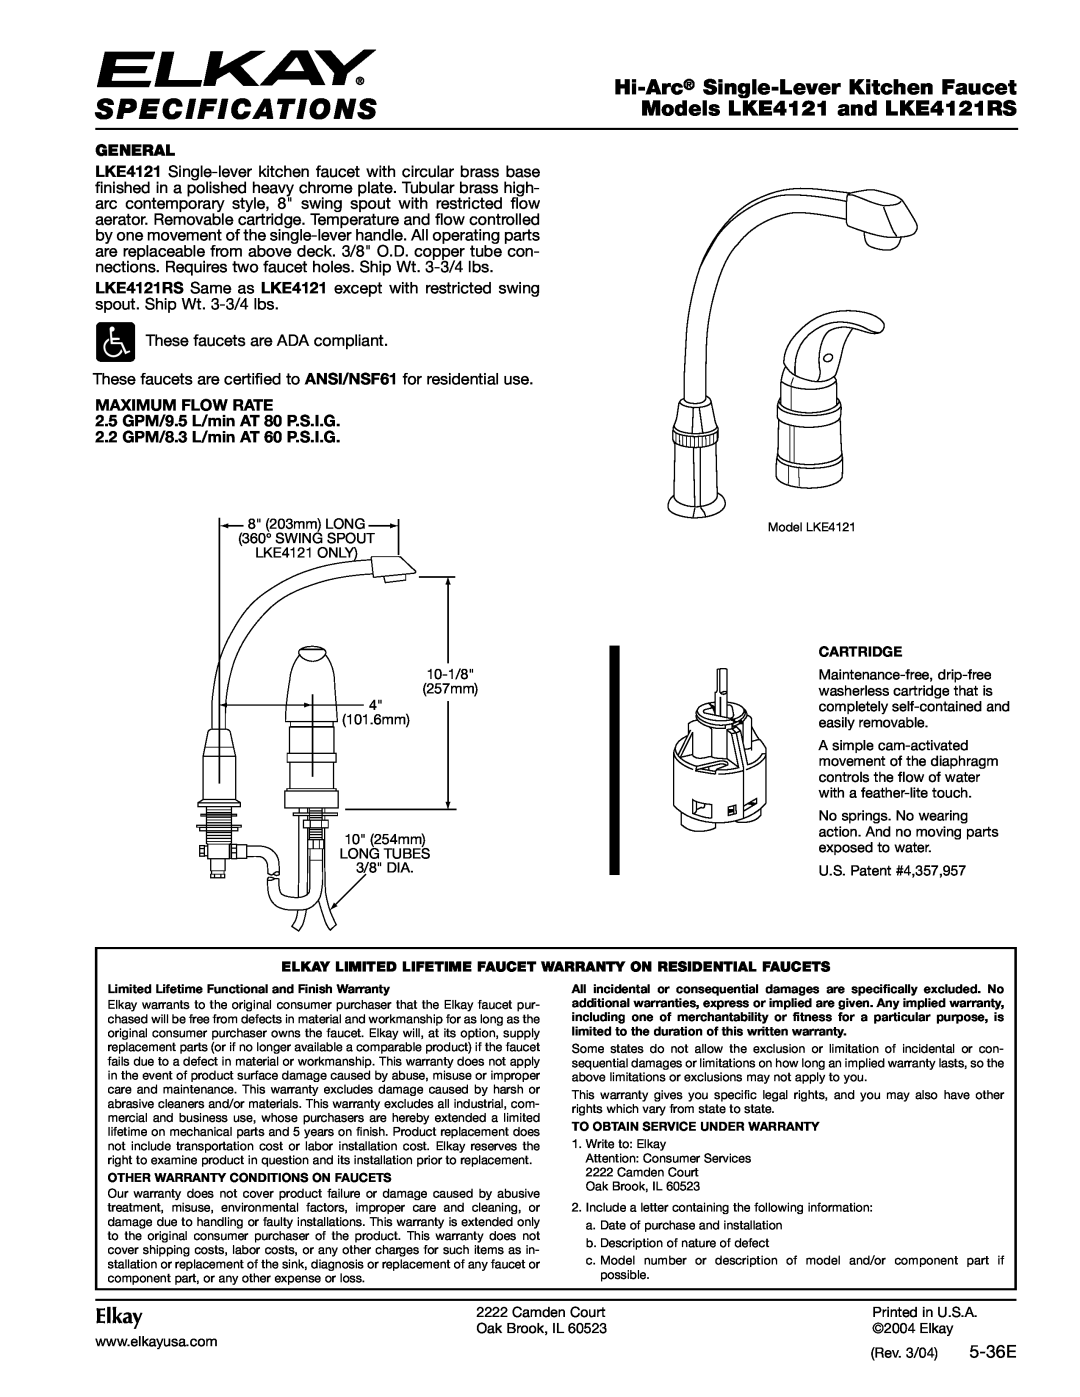 Elkay specifications Specifications, Hi-Arc Single-Lever Kitchen Faucet, Models LKE4121 and LKE4121RS, Elkay, 5-36E 